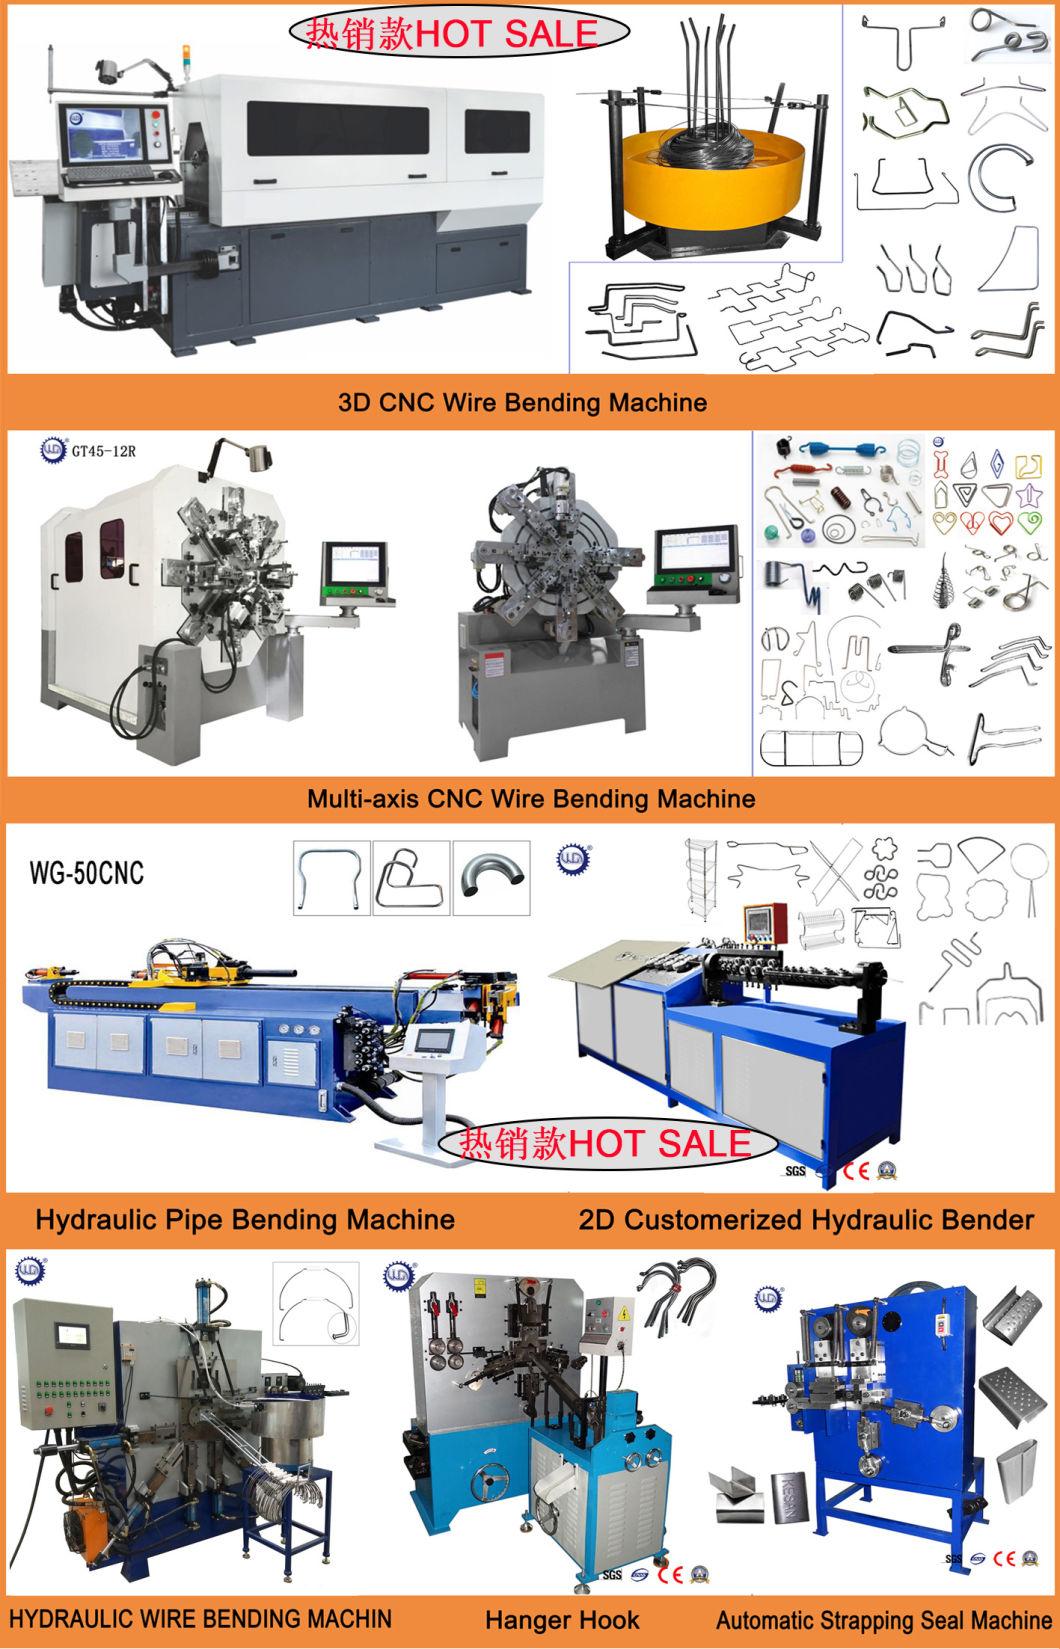 Economical and Prectial 2D Wire Bending Machine with Competitive Price